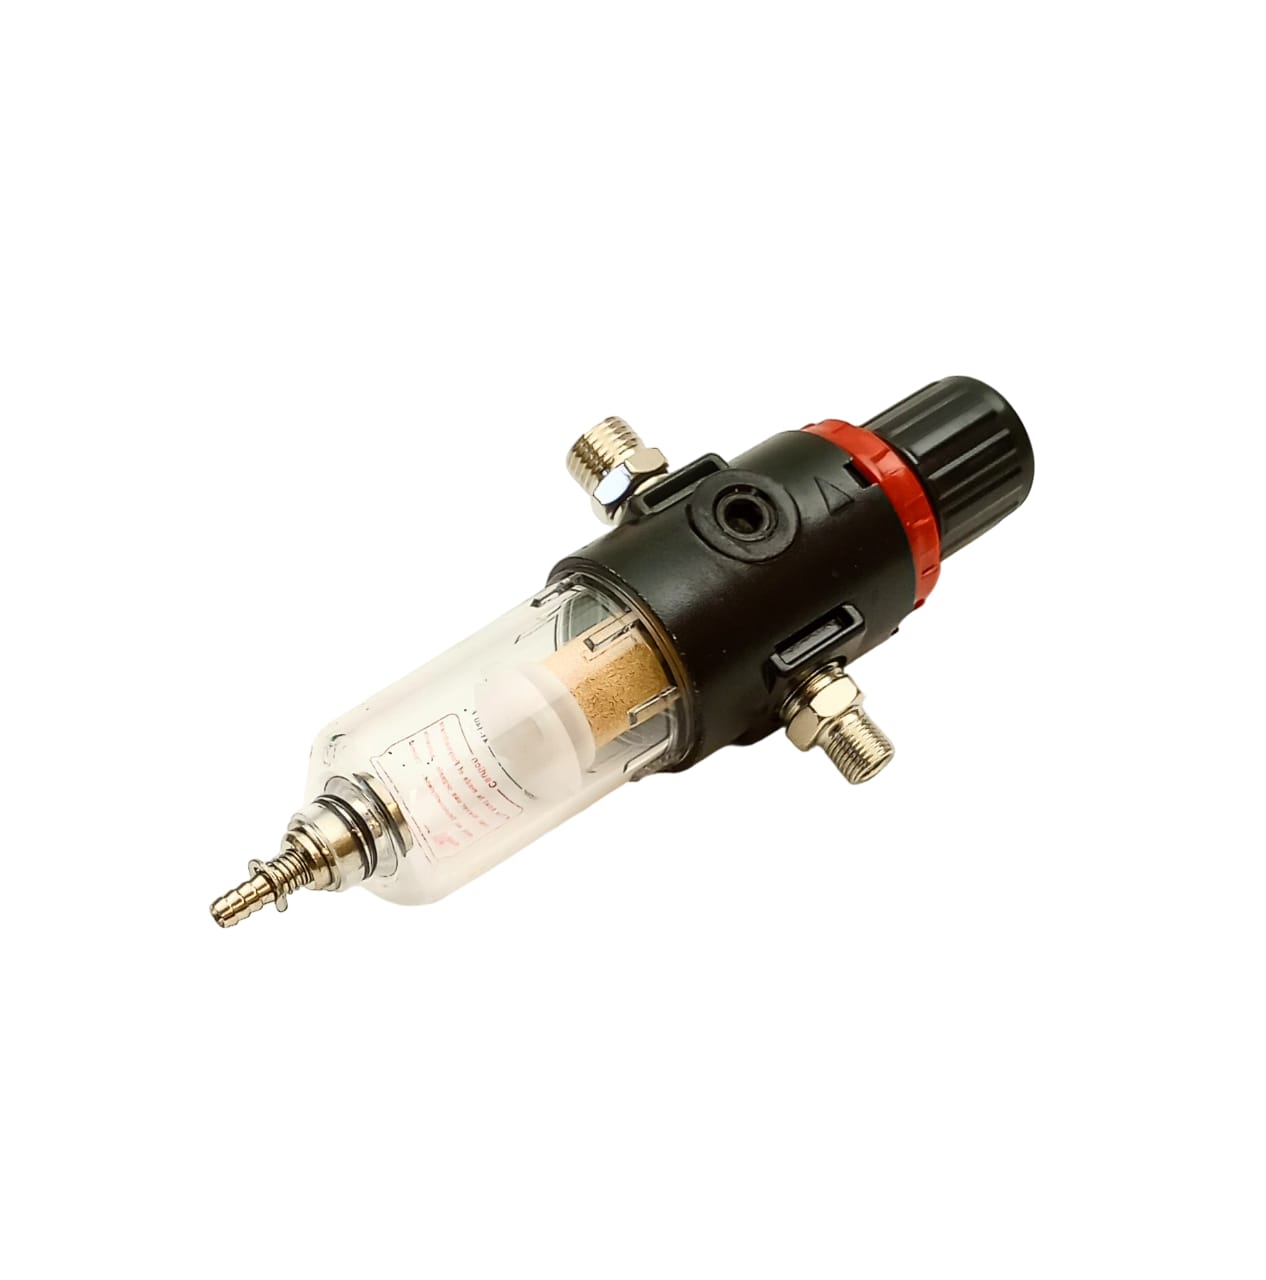 BA020 Adjustable Pressure Valve and Water Trap